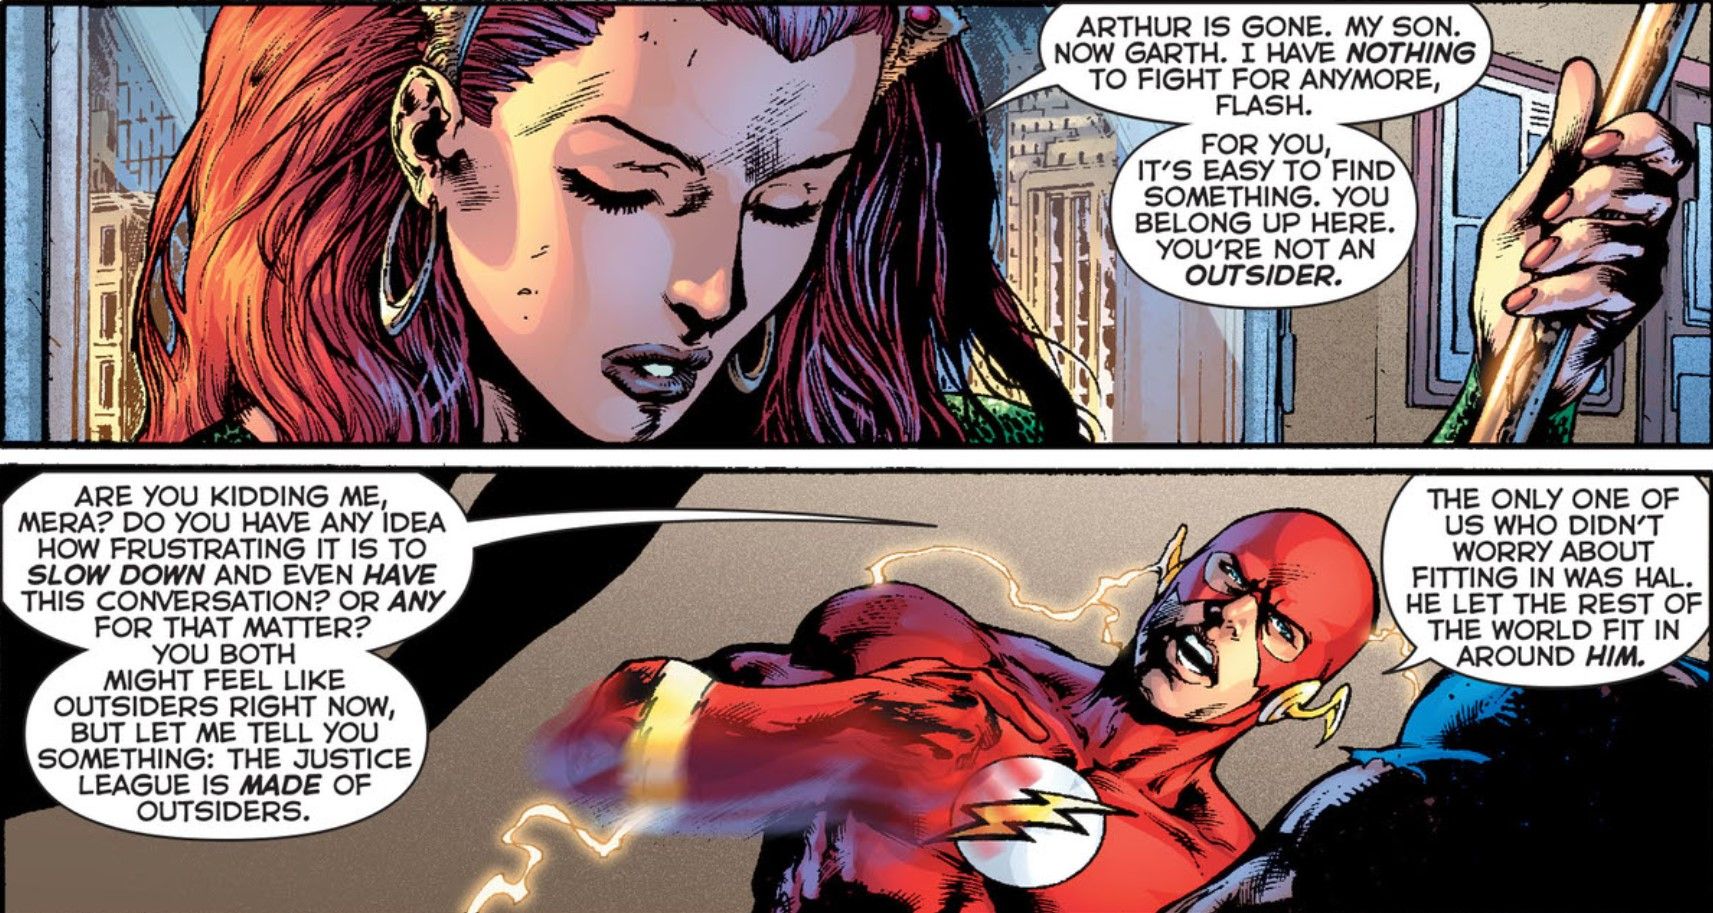 Flash Beat the One Huge Superspeed Weakness That Quicksilver Can’t